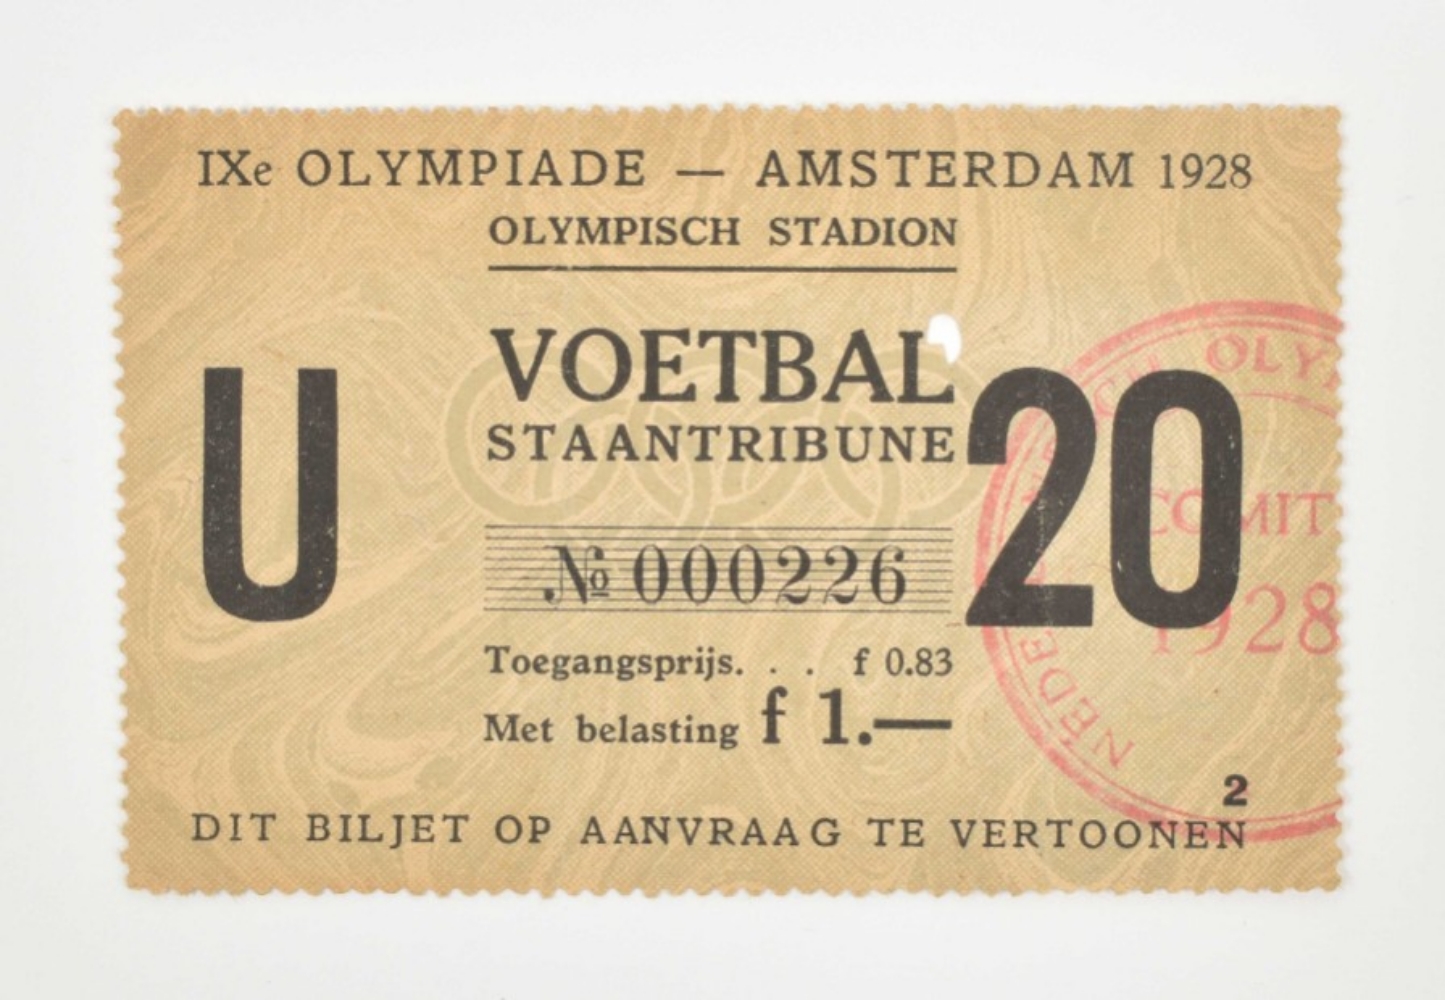 Collection of Olympic Games 1928 tickets - Image 4 of 5